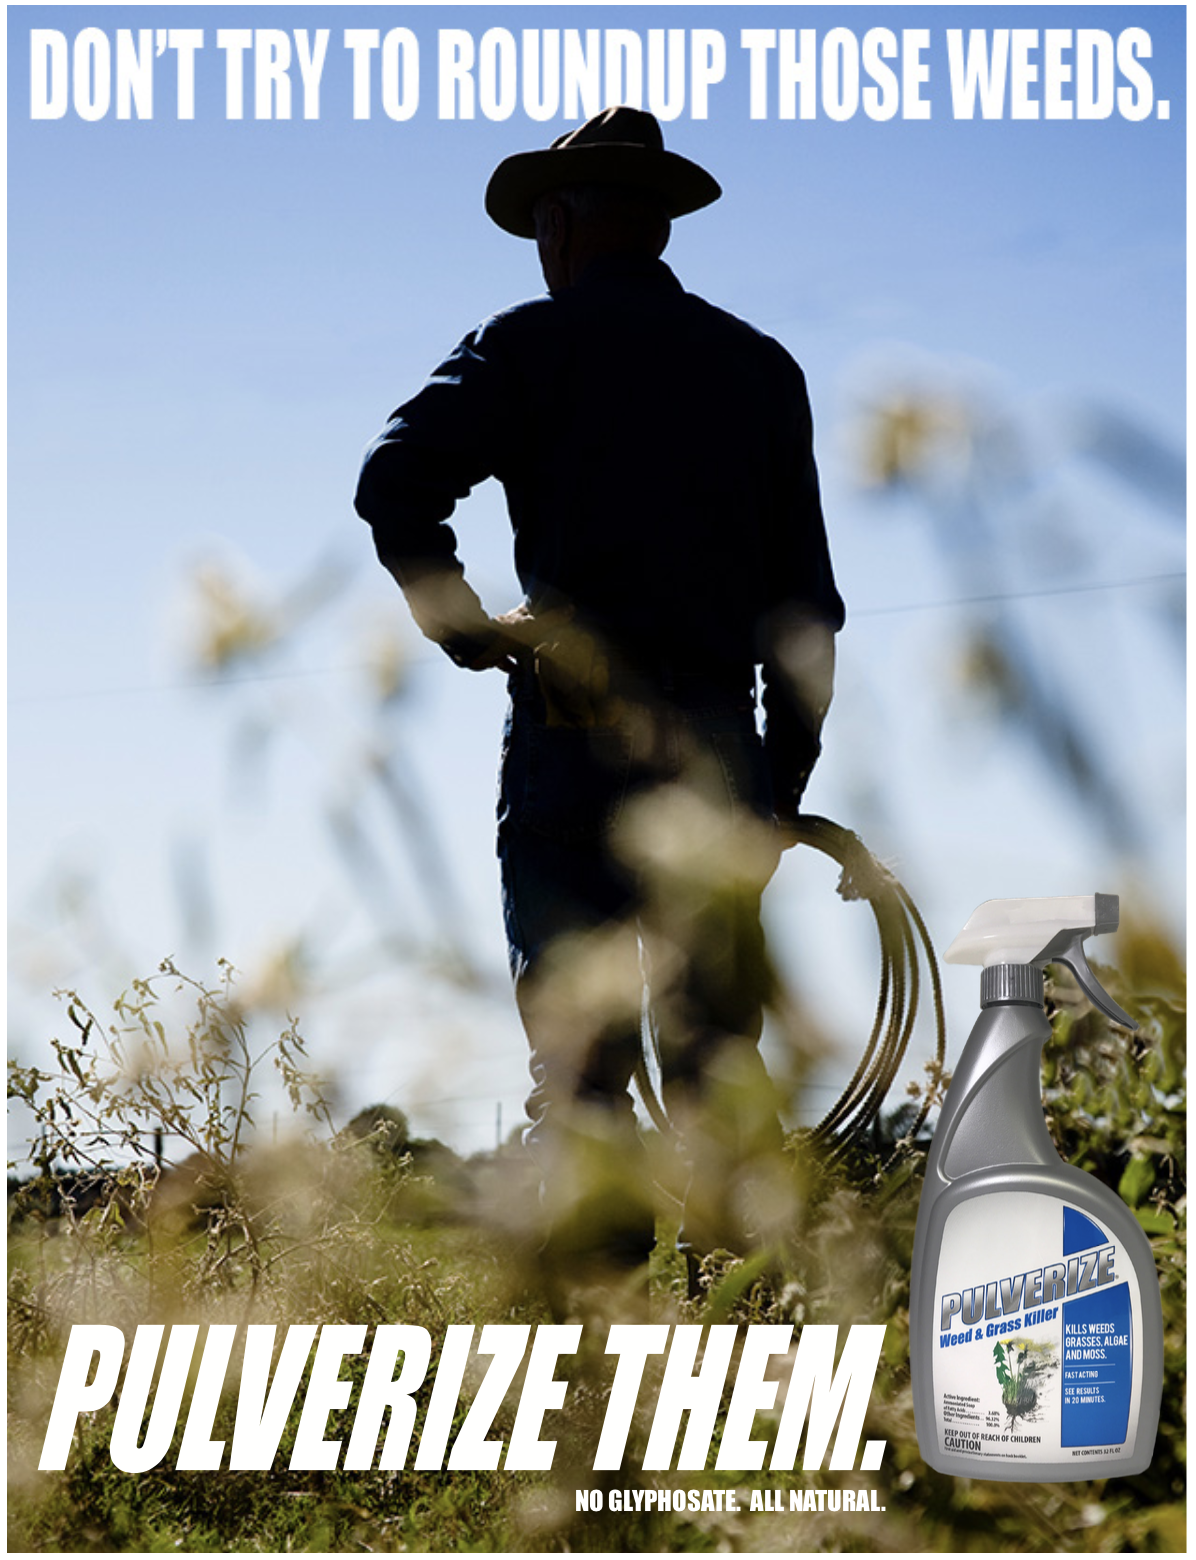 Pulverize Weed Killer S 2019 National Ad Campaign Aims To Wrangle Up Consumers Looking For A Natural Alternative To Glyphosate,Dryer Outlet Adapter